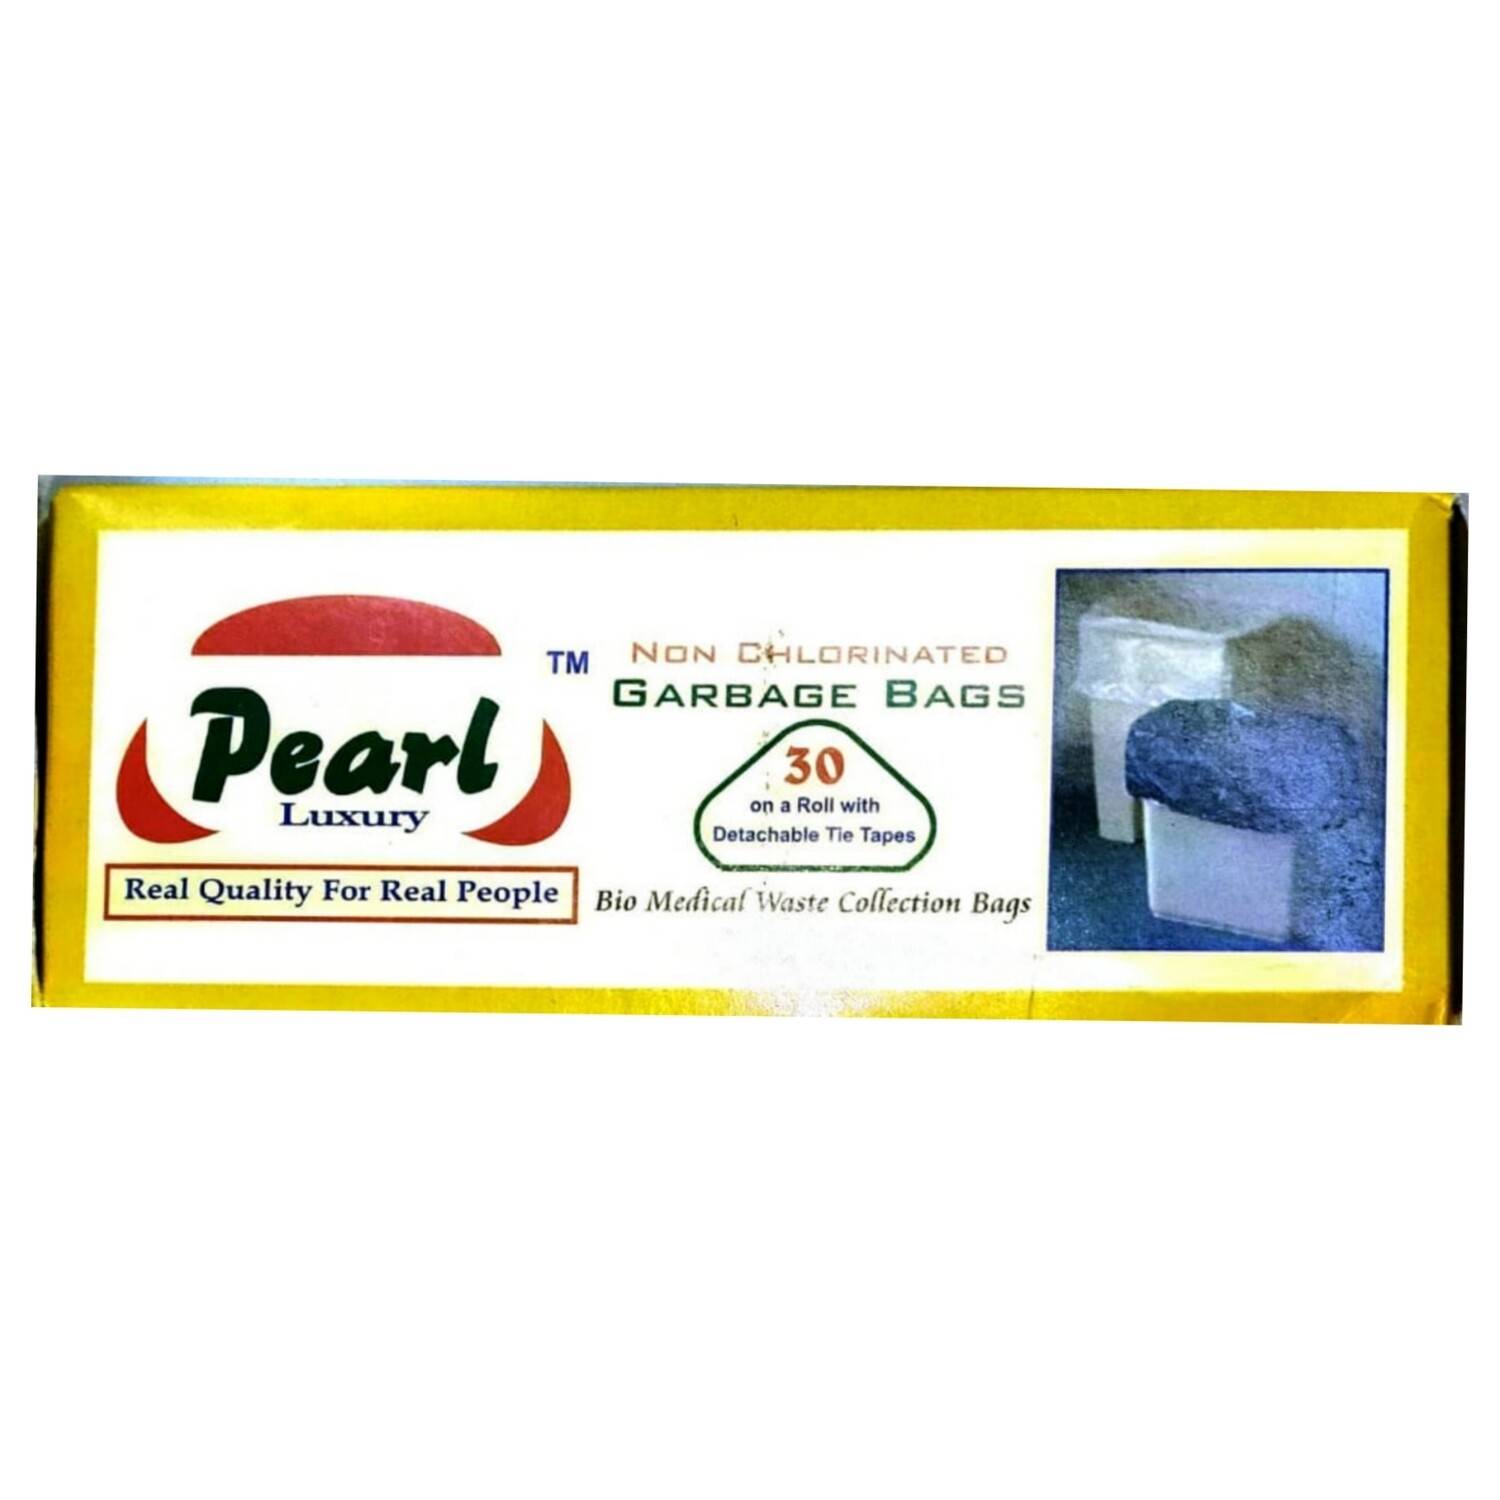 Pearl Non chlorinated Garbage Bags - 30Pcs - with detachable tie ropes - 48cmX54cm